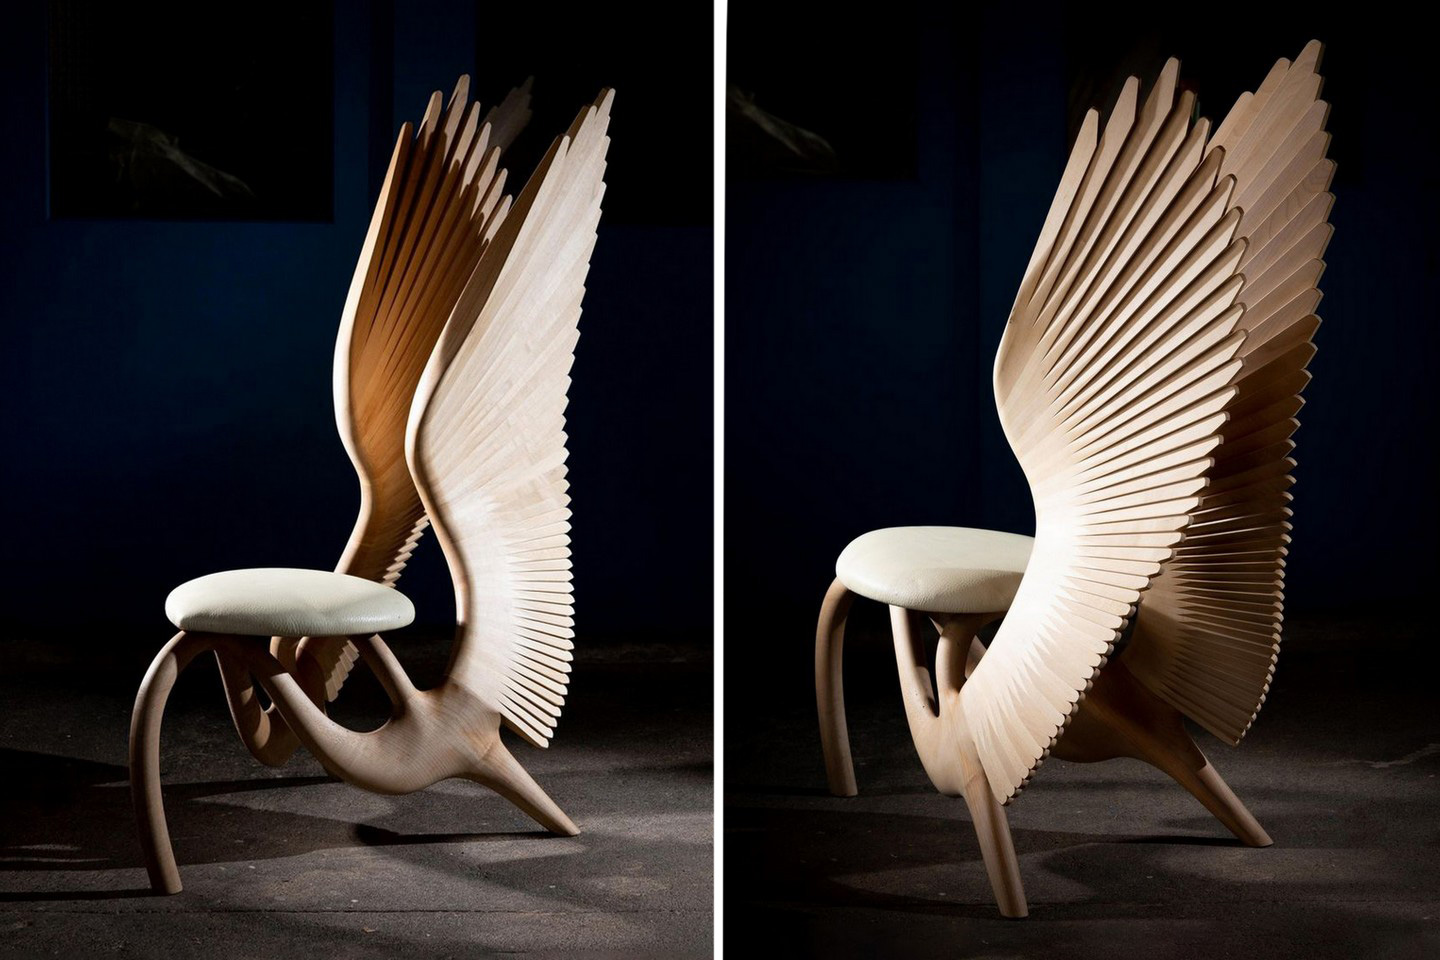 https://www.yankodesign.com/images/design_news/2022/02/auto-draft/sycamore_chair_1.jpg